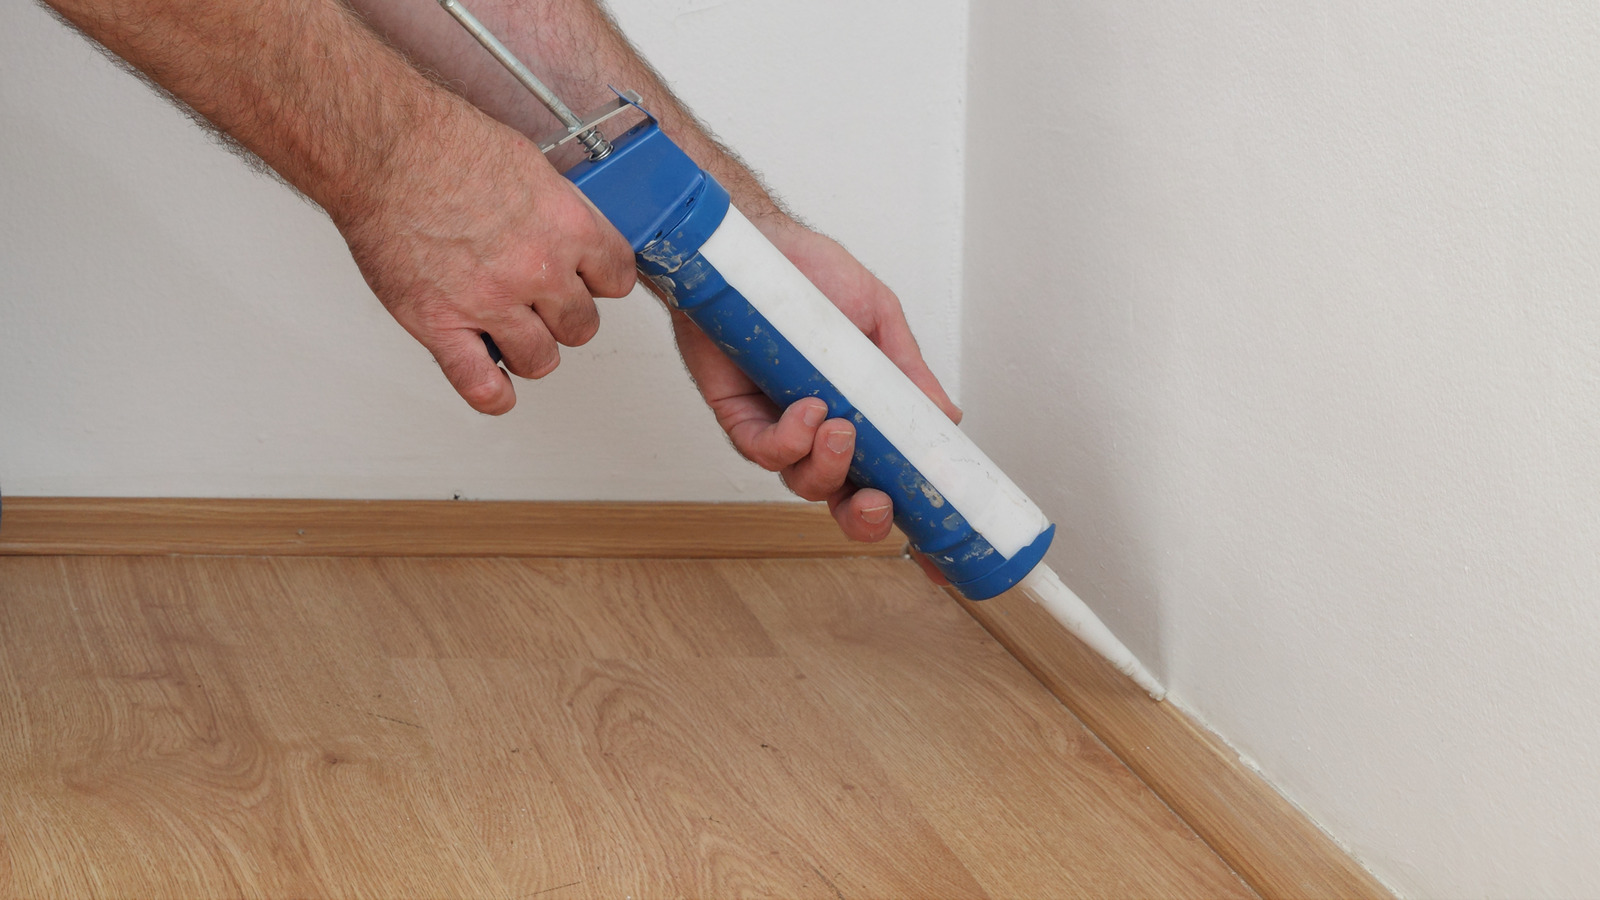 Silicone vs caulk: What's the difference between sealants